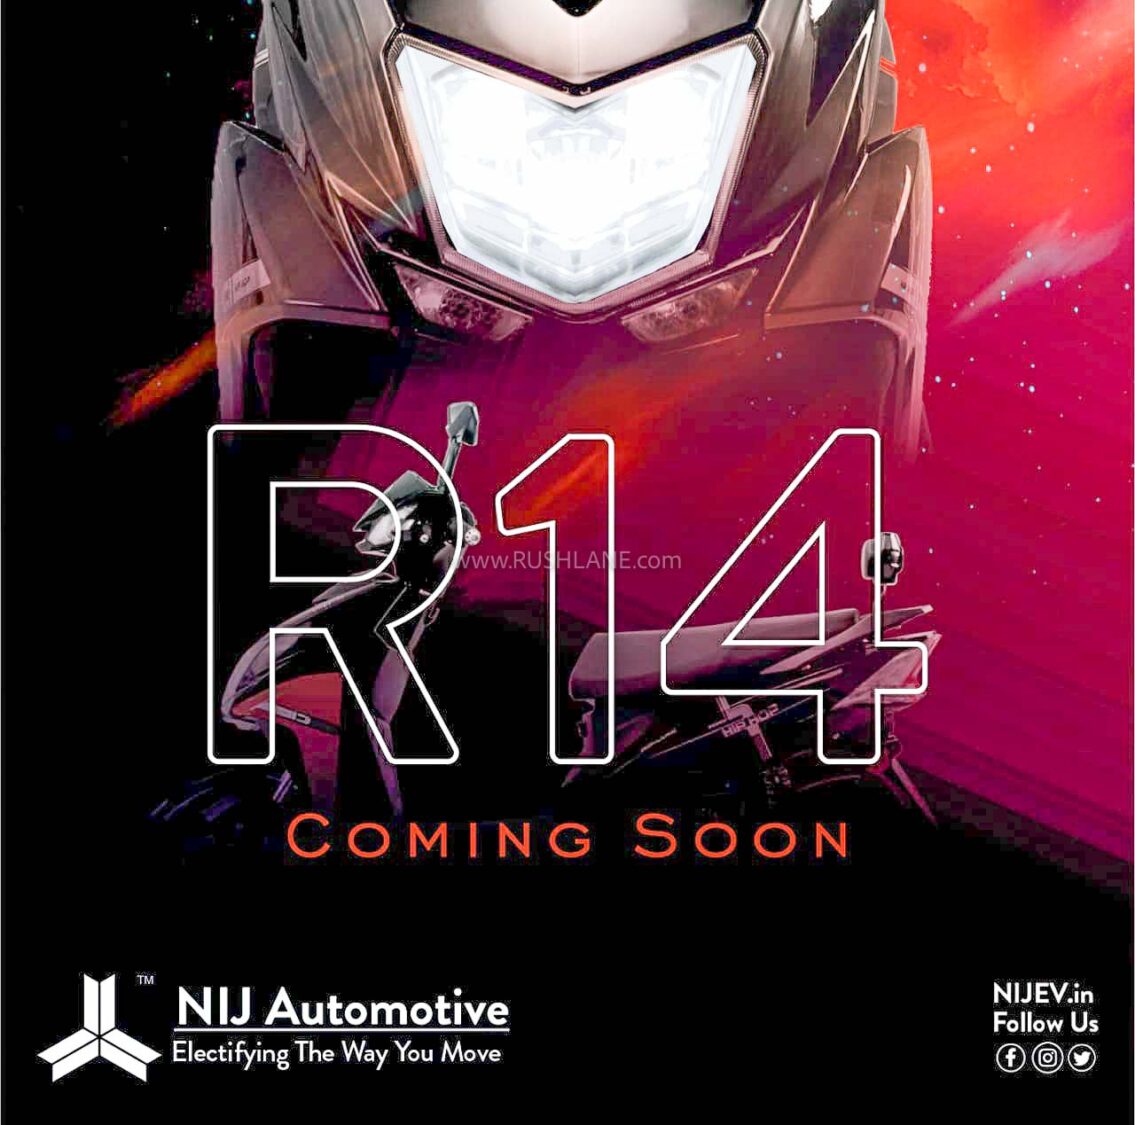 NIJ Electric Scooter R14 Coming Soon Teaser